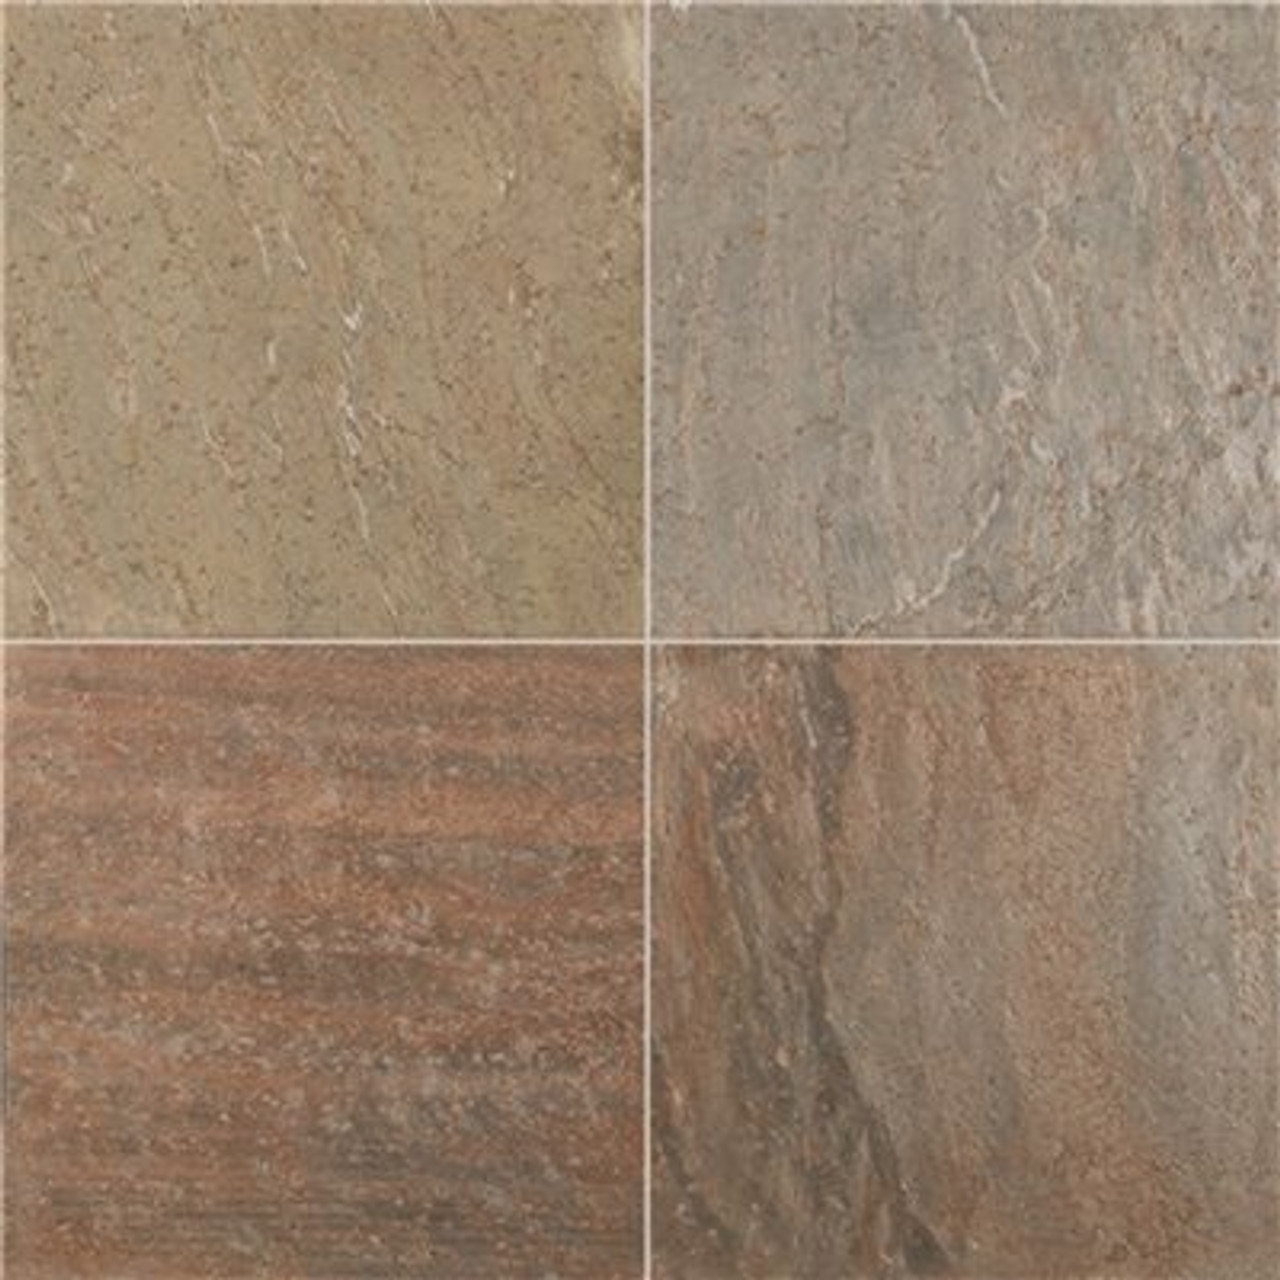 Msi Copper Fire 16 In. X 16 In. Honed Quartzite Floor And Wall Tile (8.9 Sq. Ft. / Case)